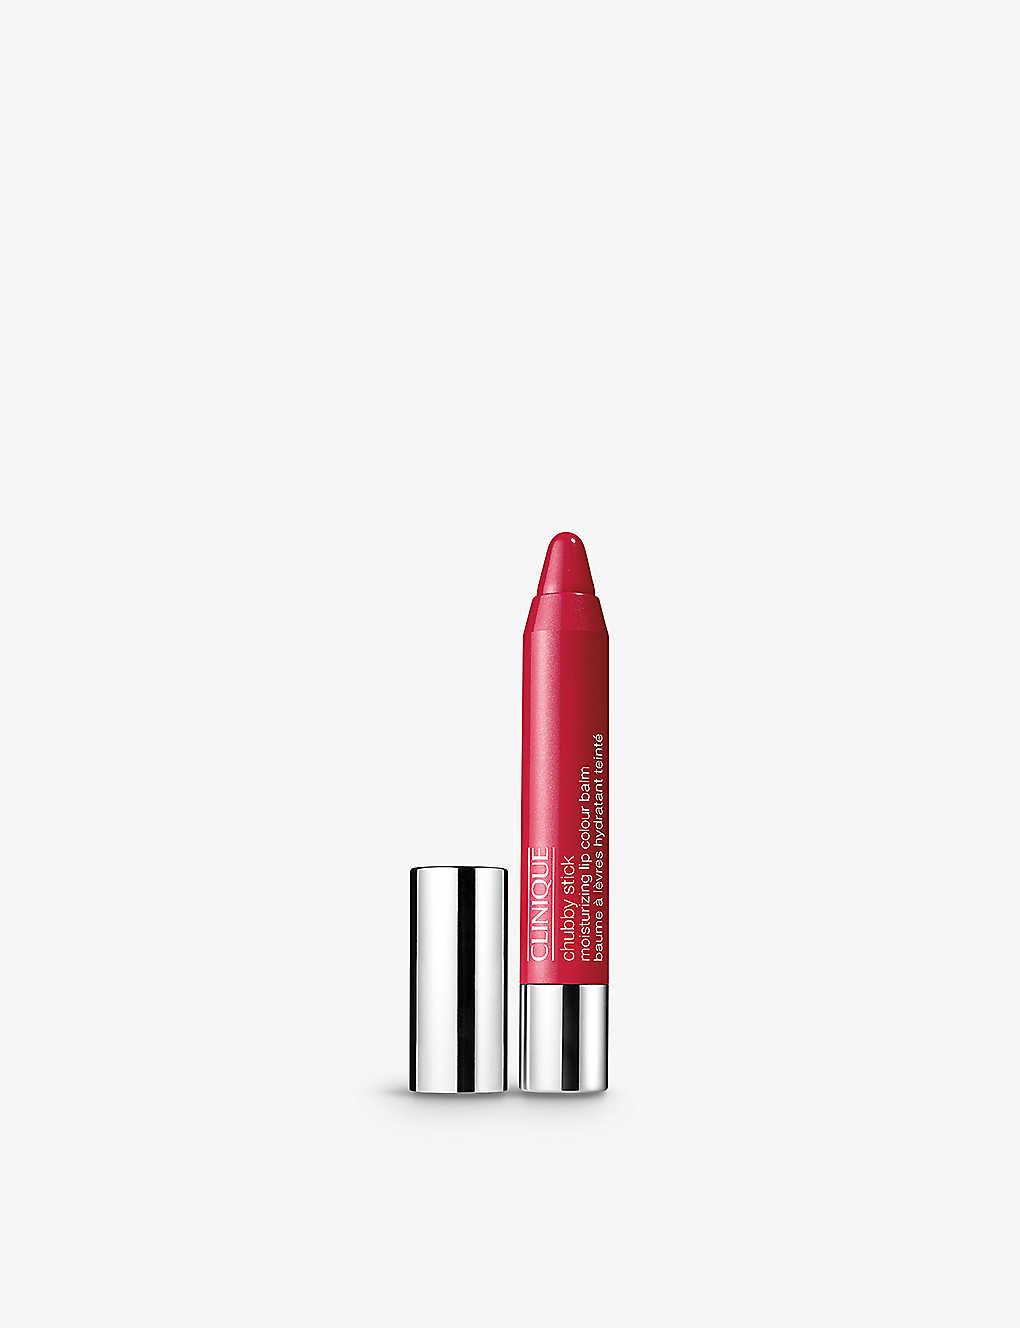 Clinique Chubby Stick Lip Colour Balm 3g In Mightiest Maraschino